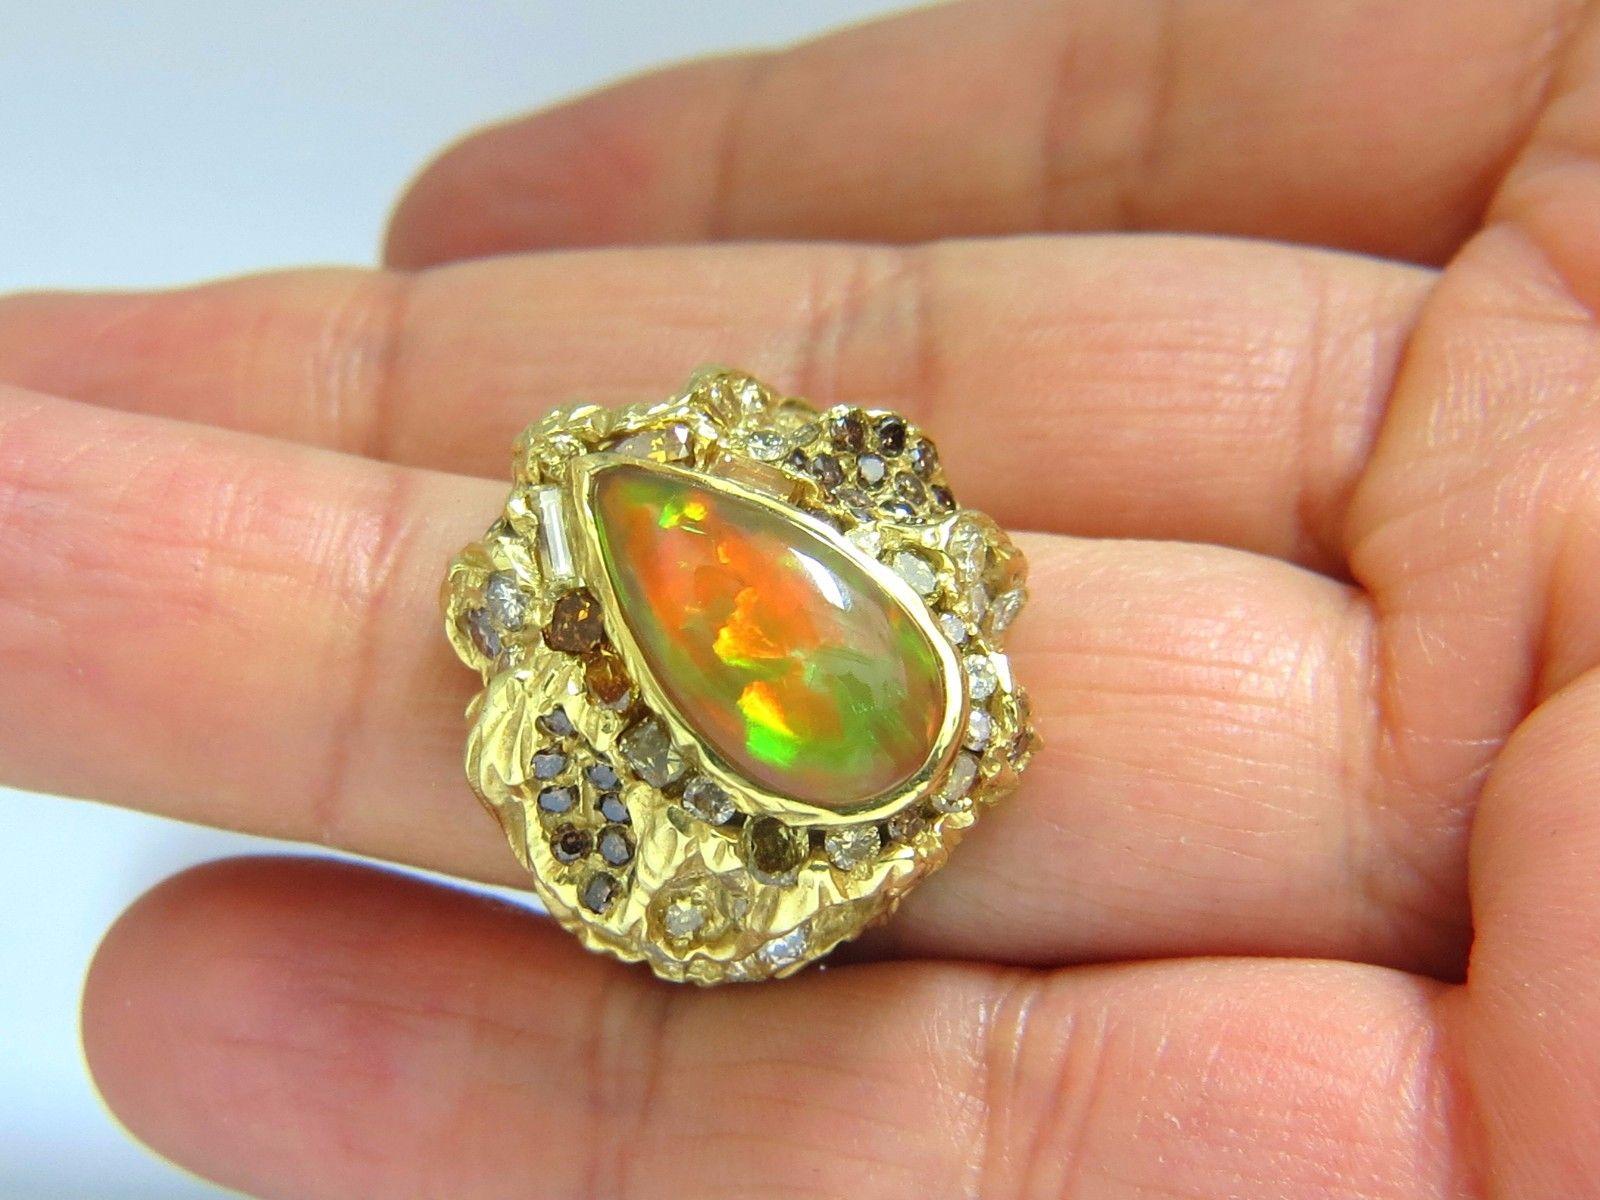 6.00CT Natural Opal Ring.

Cabochon Pear Shaped

VS clean clarity

Brilliant rays of orange, greens and some reds.

A true holographic effect

Opal is NOT a dublet

17 X 8 mm



6.25ct. diamonds

Rounds and full cuts.

Mix of natural fancy browns